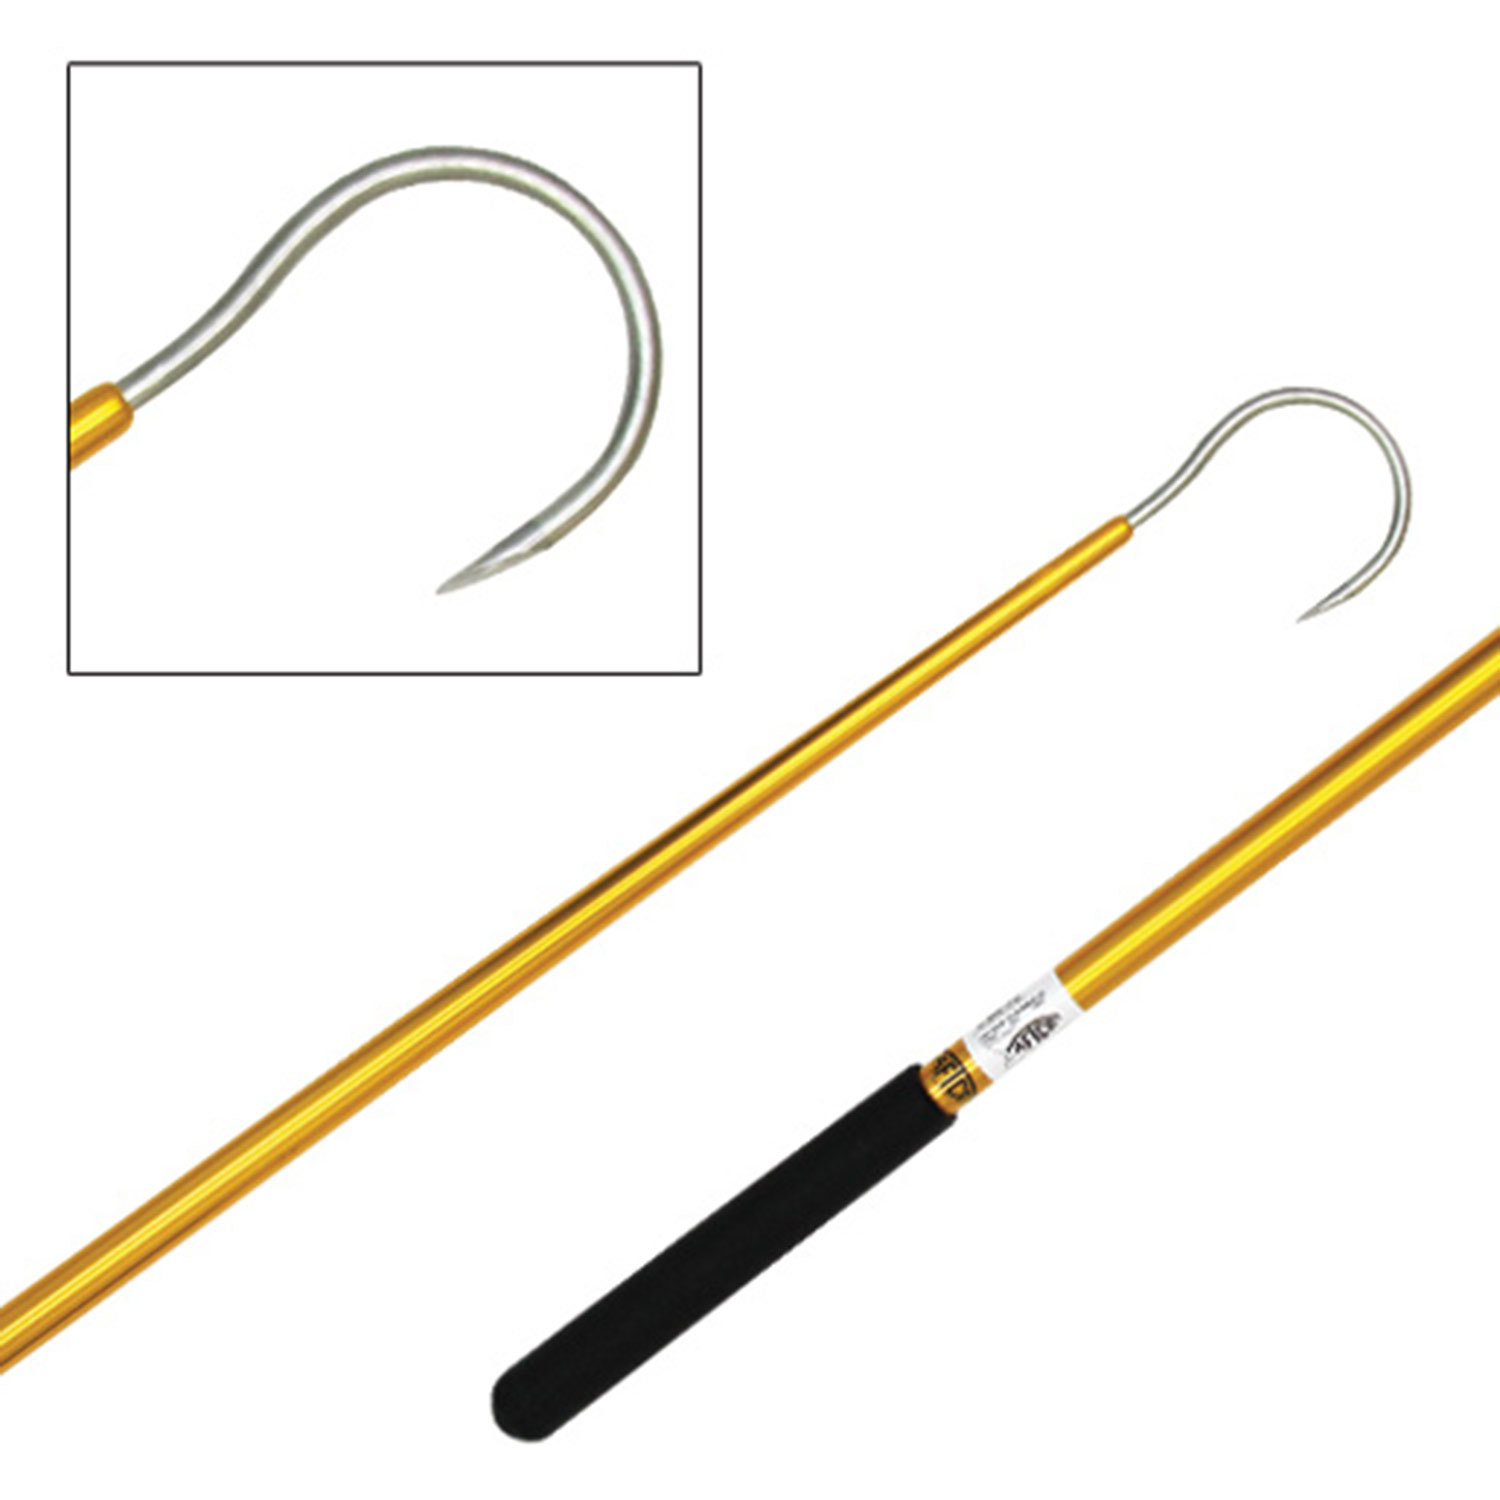 AFTCO 5' Taper-Tip Gold Anodized Gaff, 4 Hook Throat